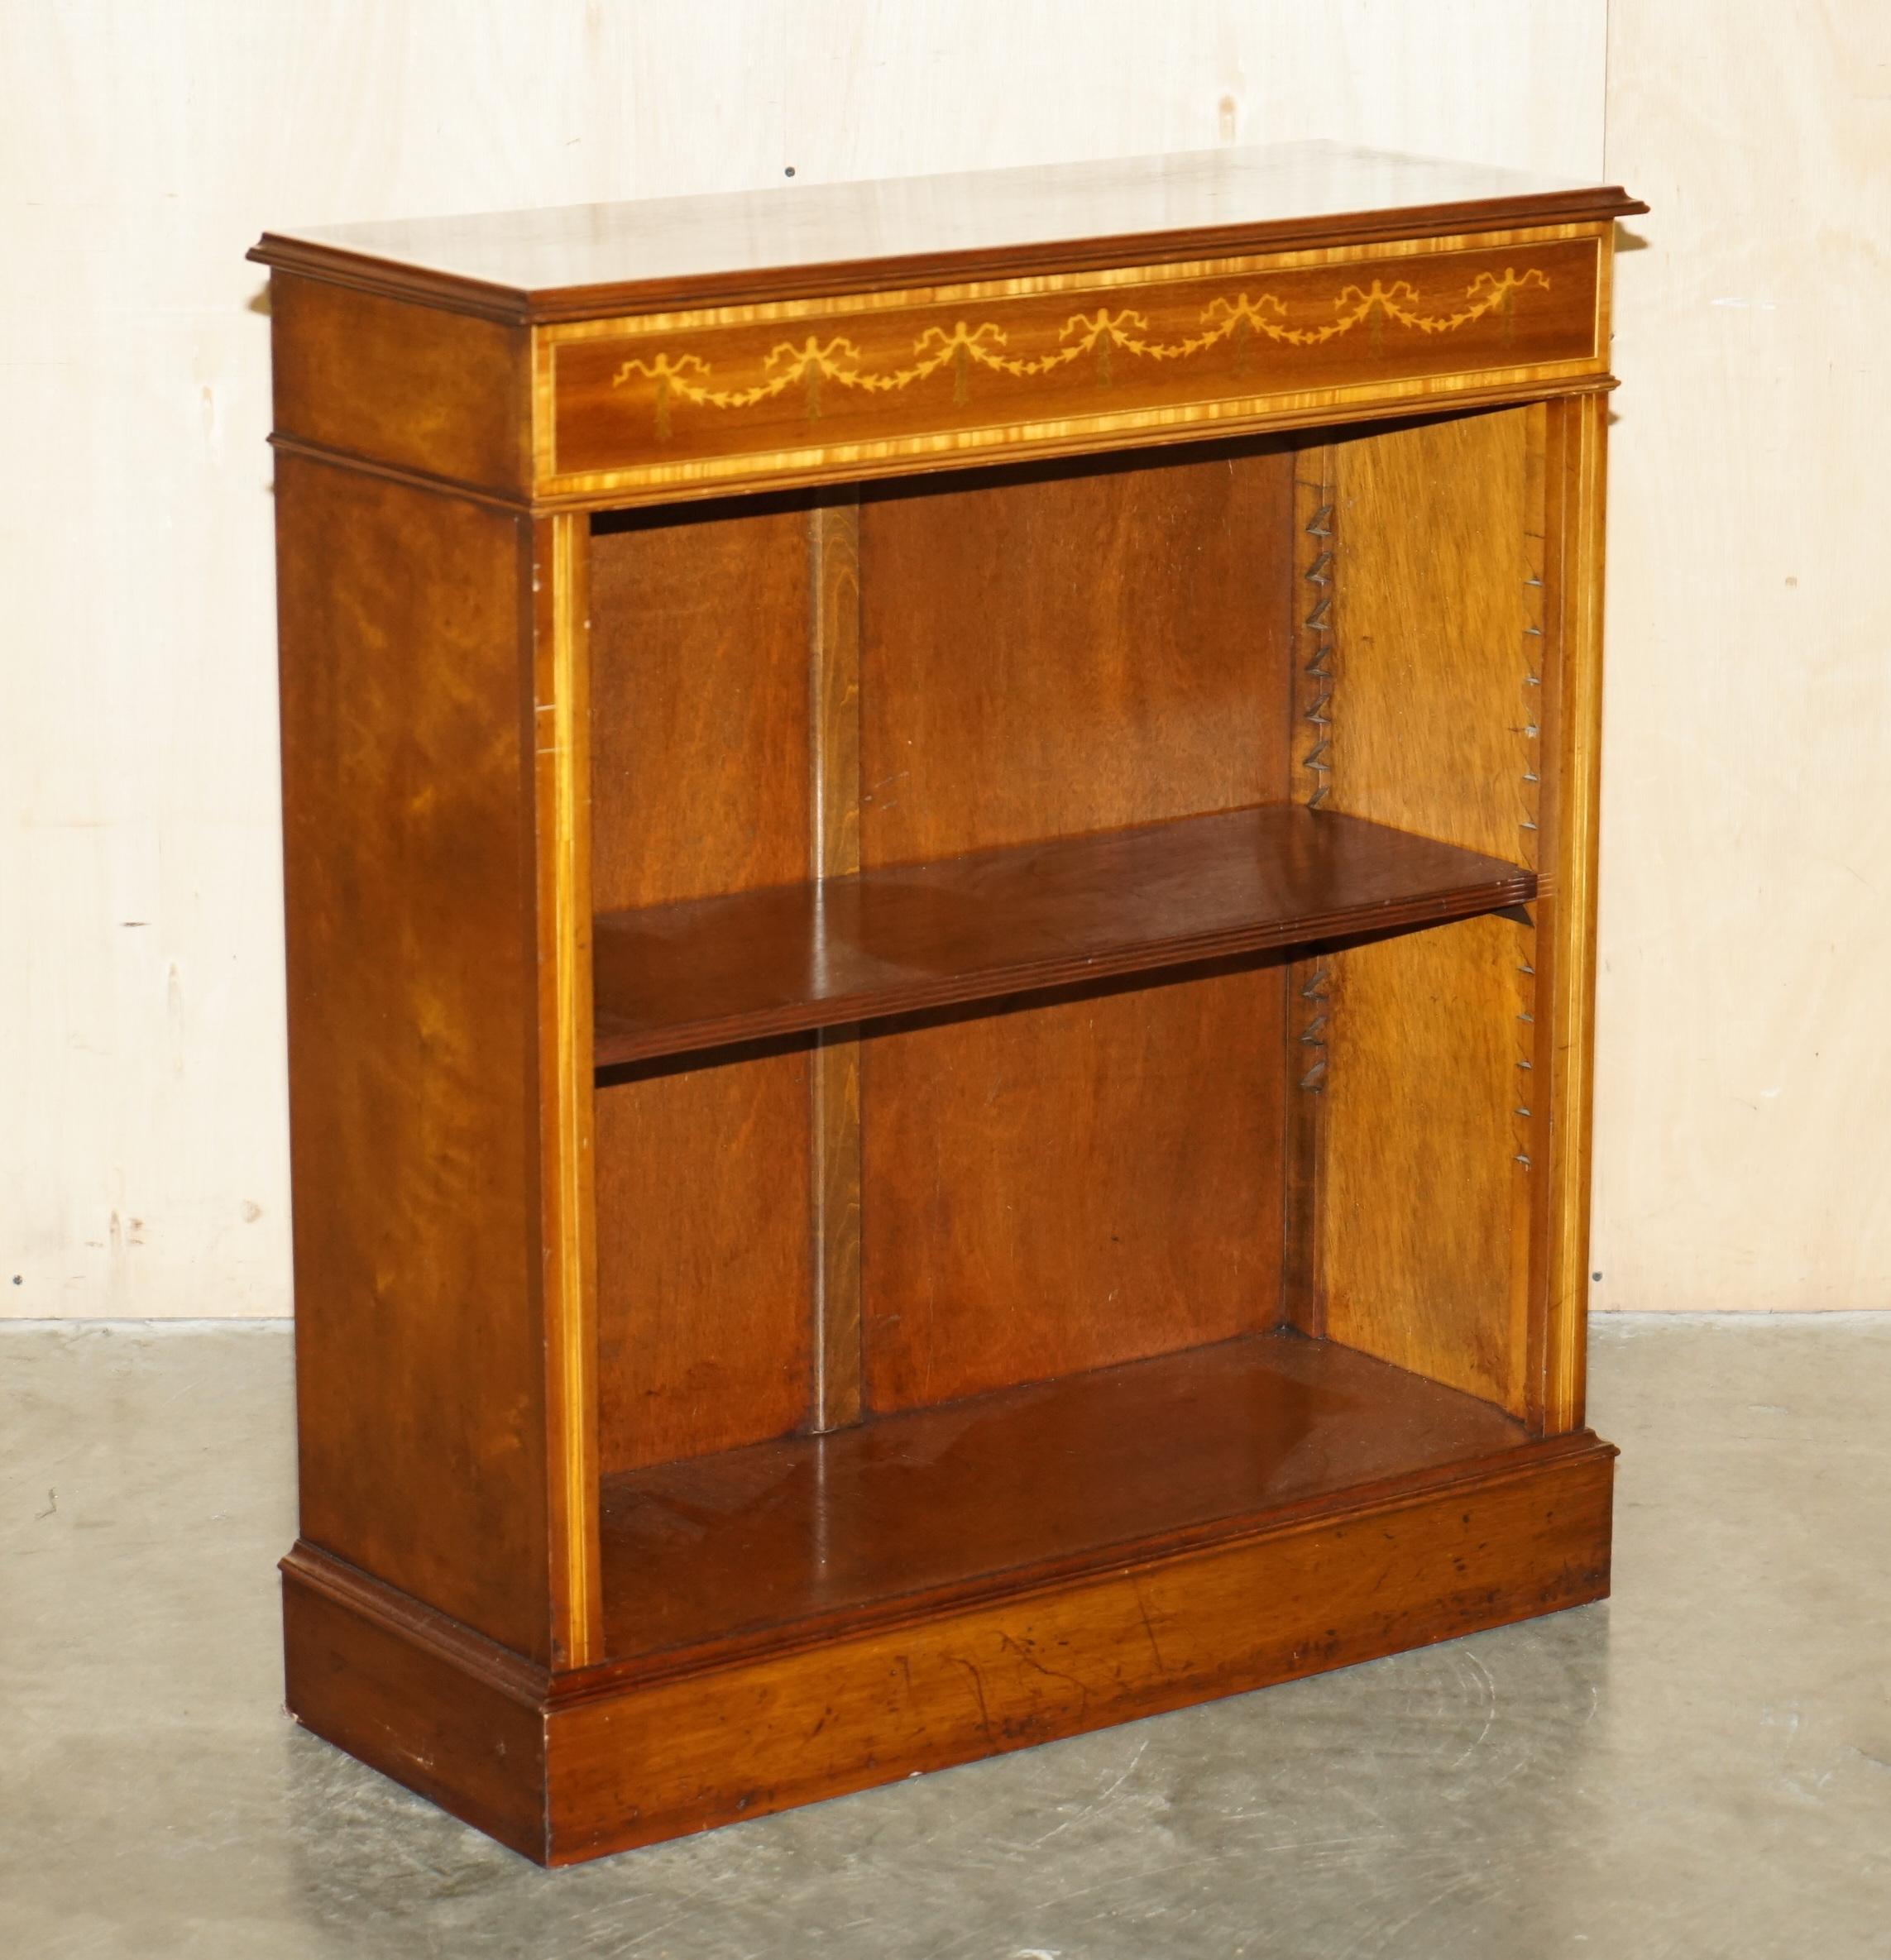 Royal House Antiques

Royal House Antiques is delighted to offer for this lovely Burr Elm, Walnut inlaid, Sheraton Revival style dwarf open library bookcase made by Brights of Nettlebed

Please note the delivery fee listed is just a guide, it covers